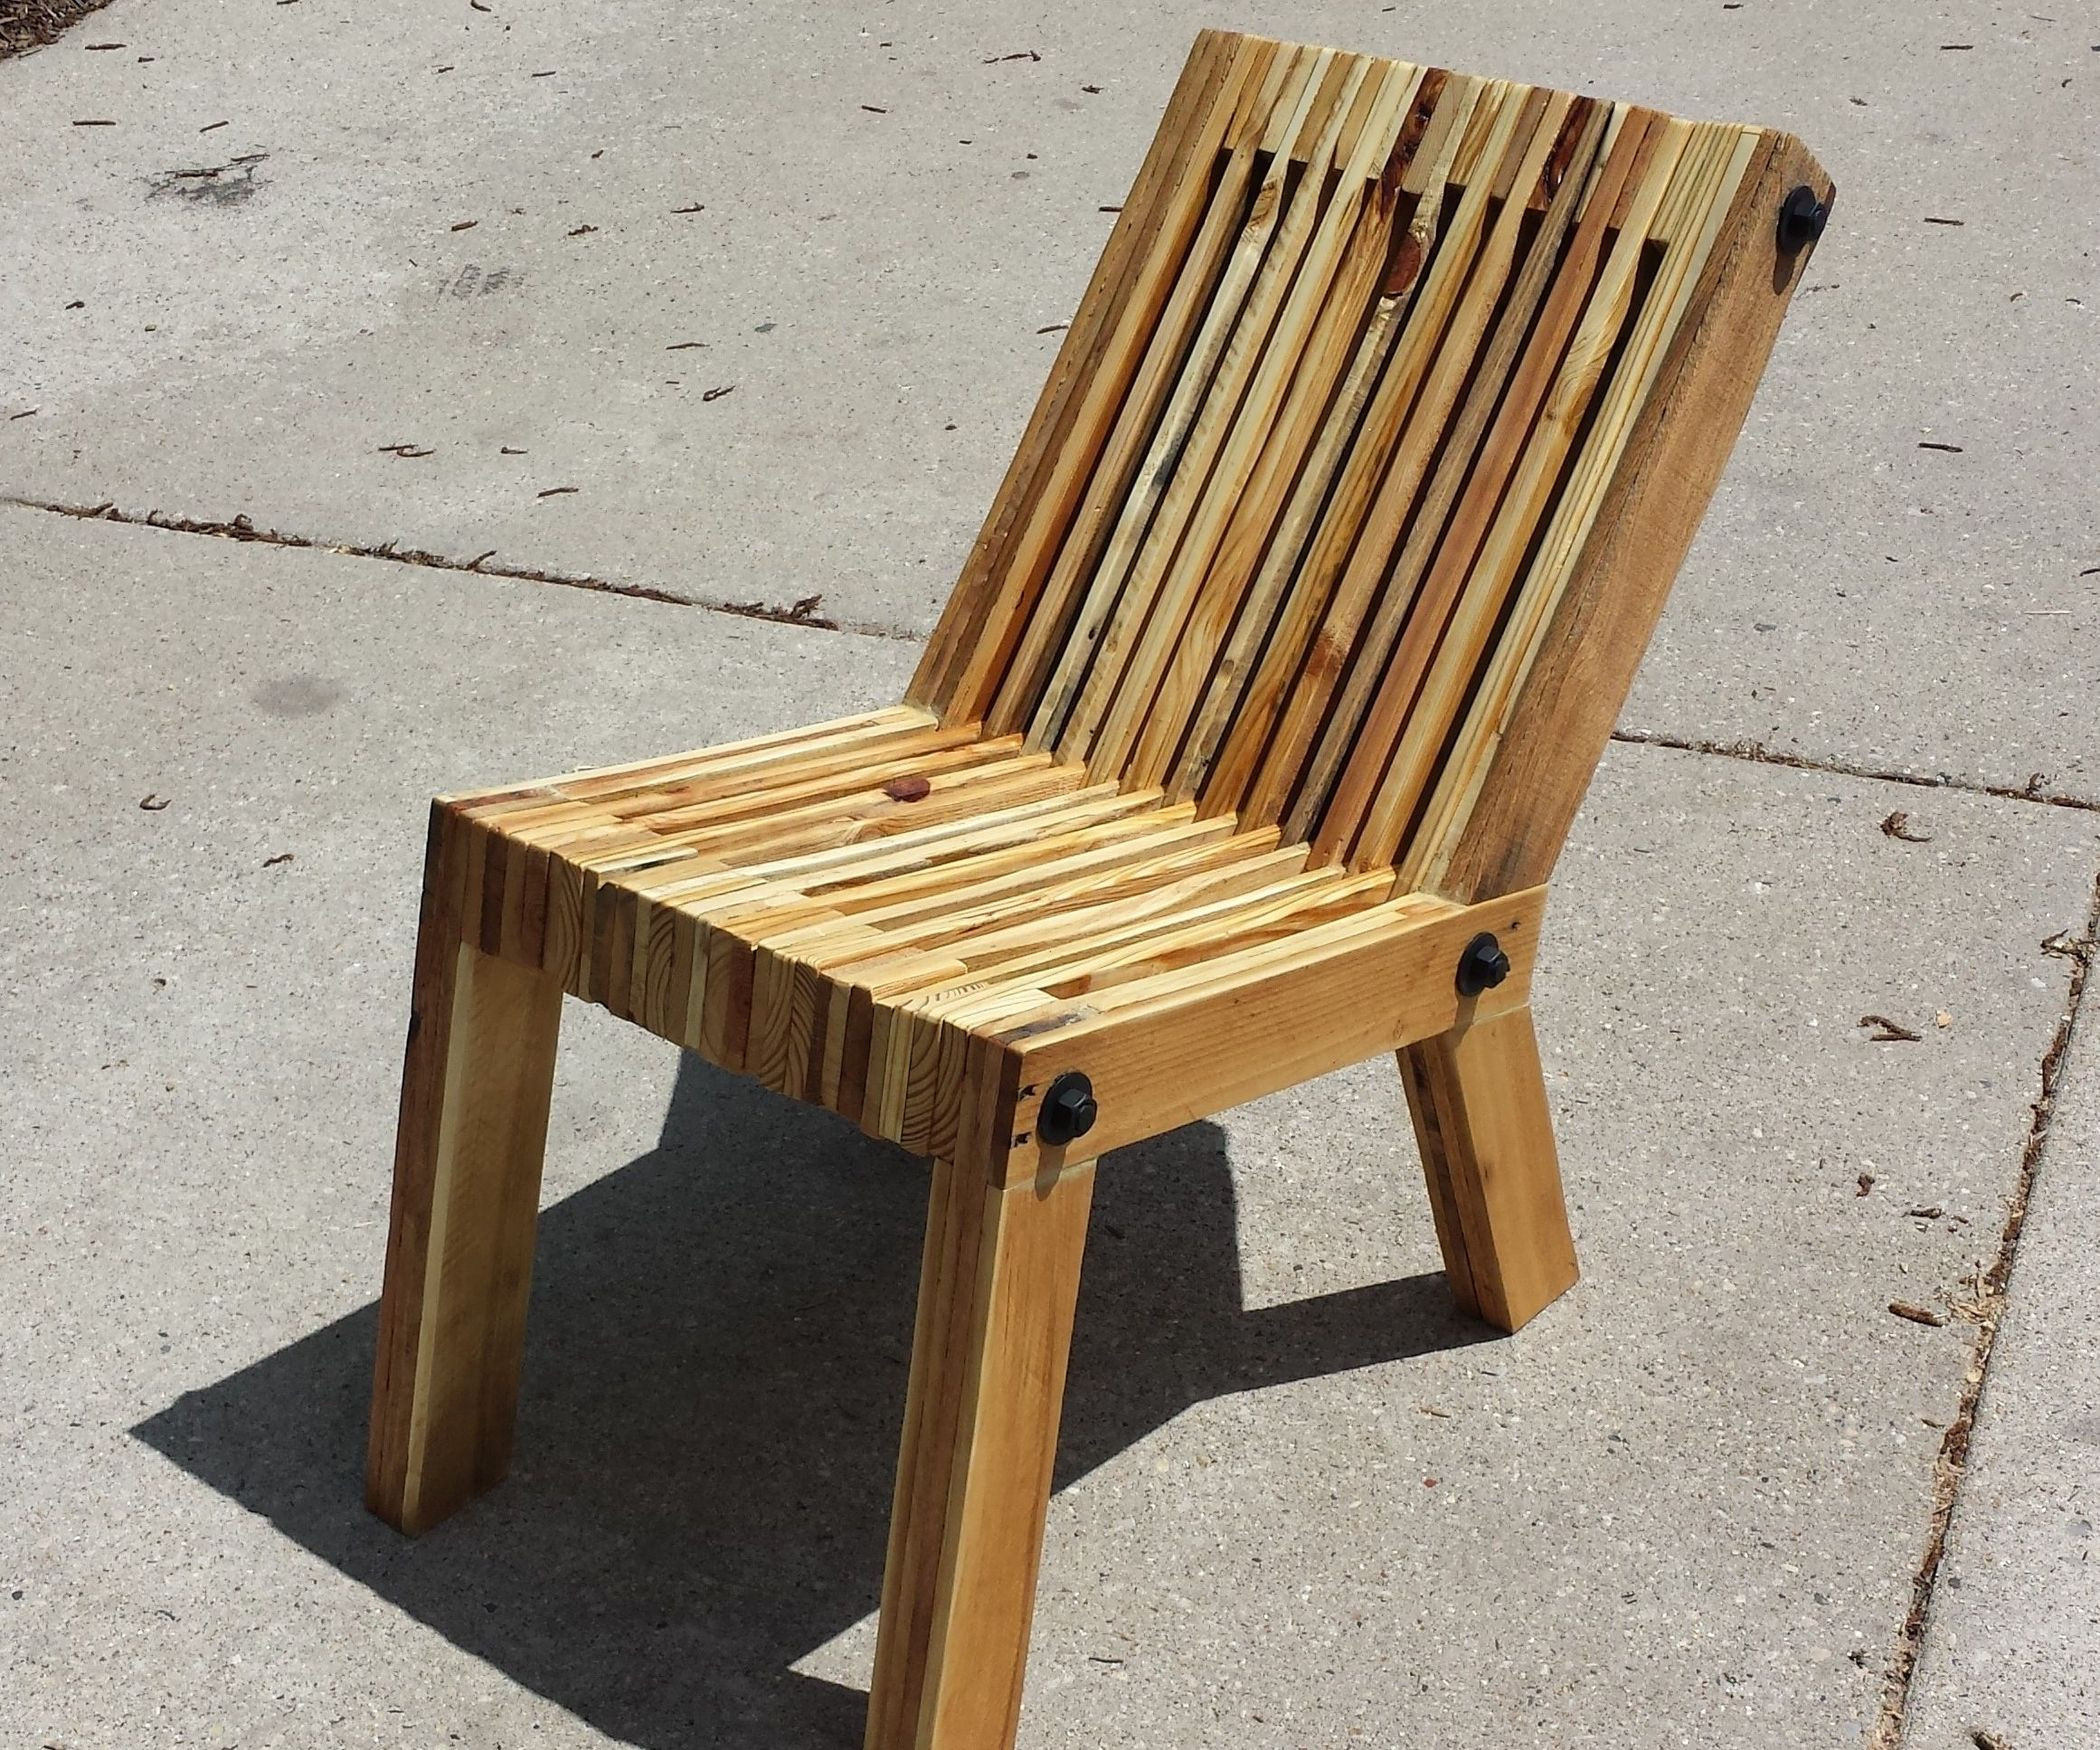 Best ideas about DIY Wooden Chair
. Save or Pin Reclined Pallet Wood Chair 11 Steps with Now.